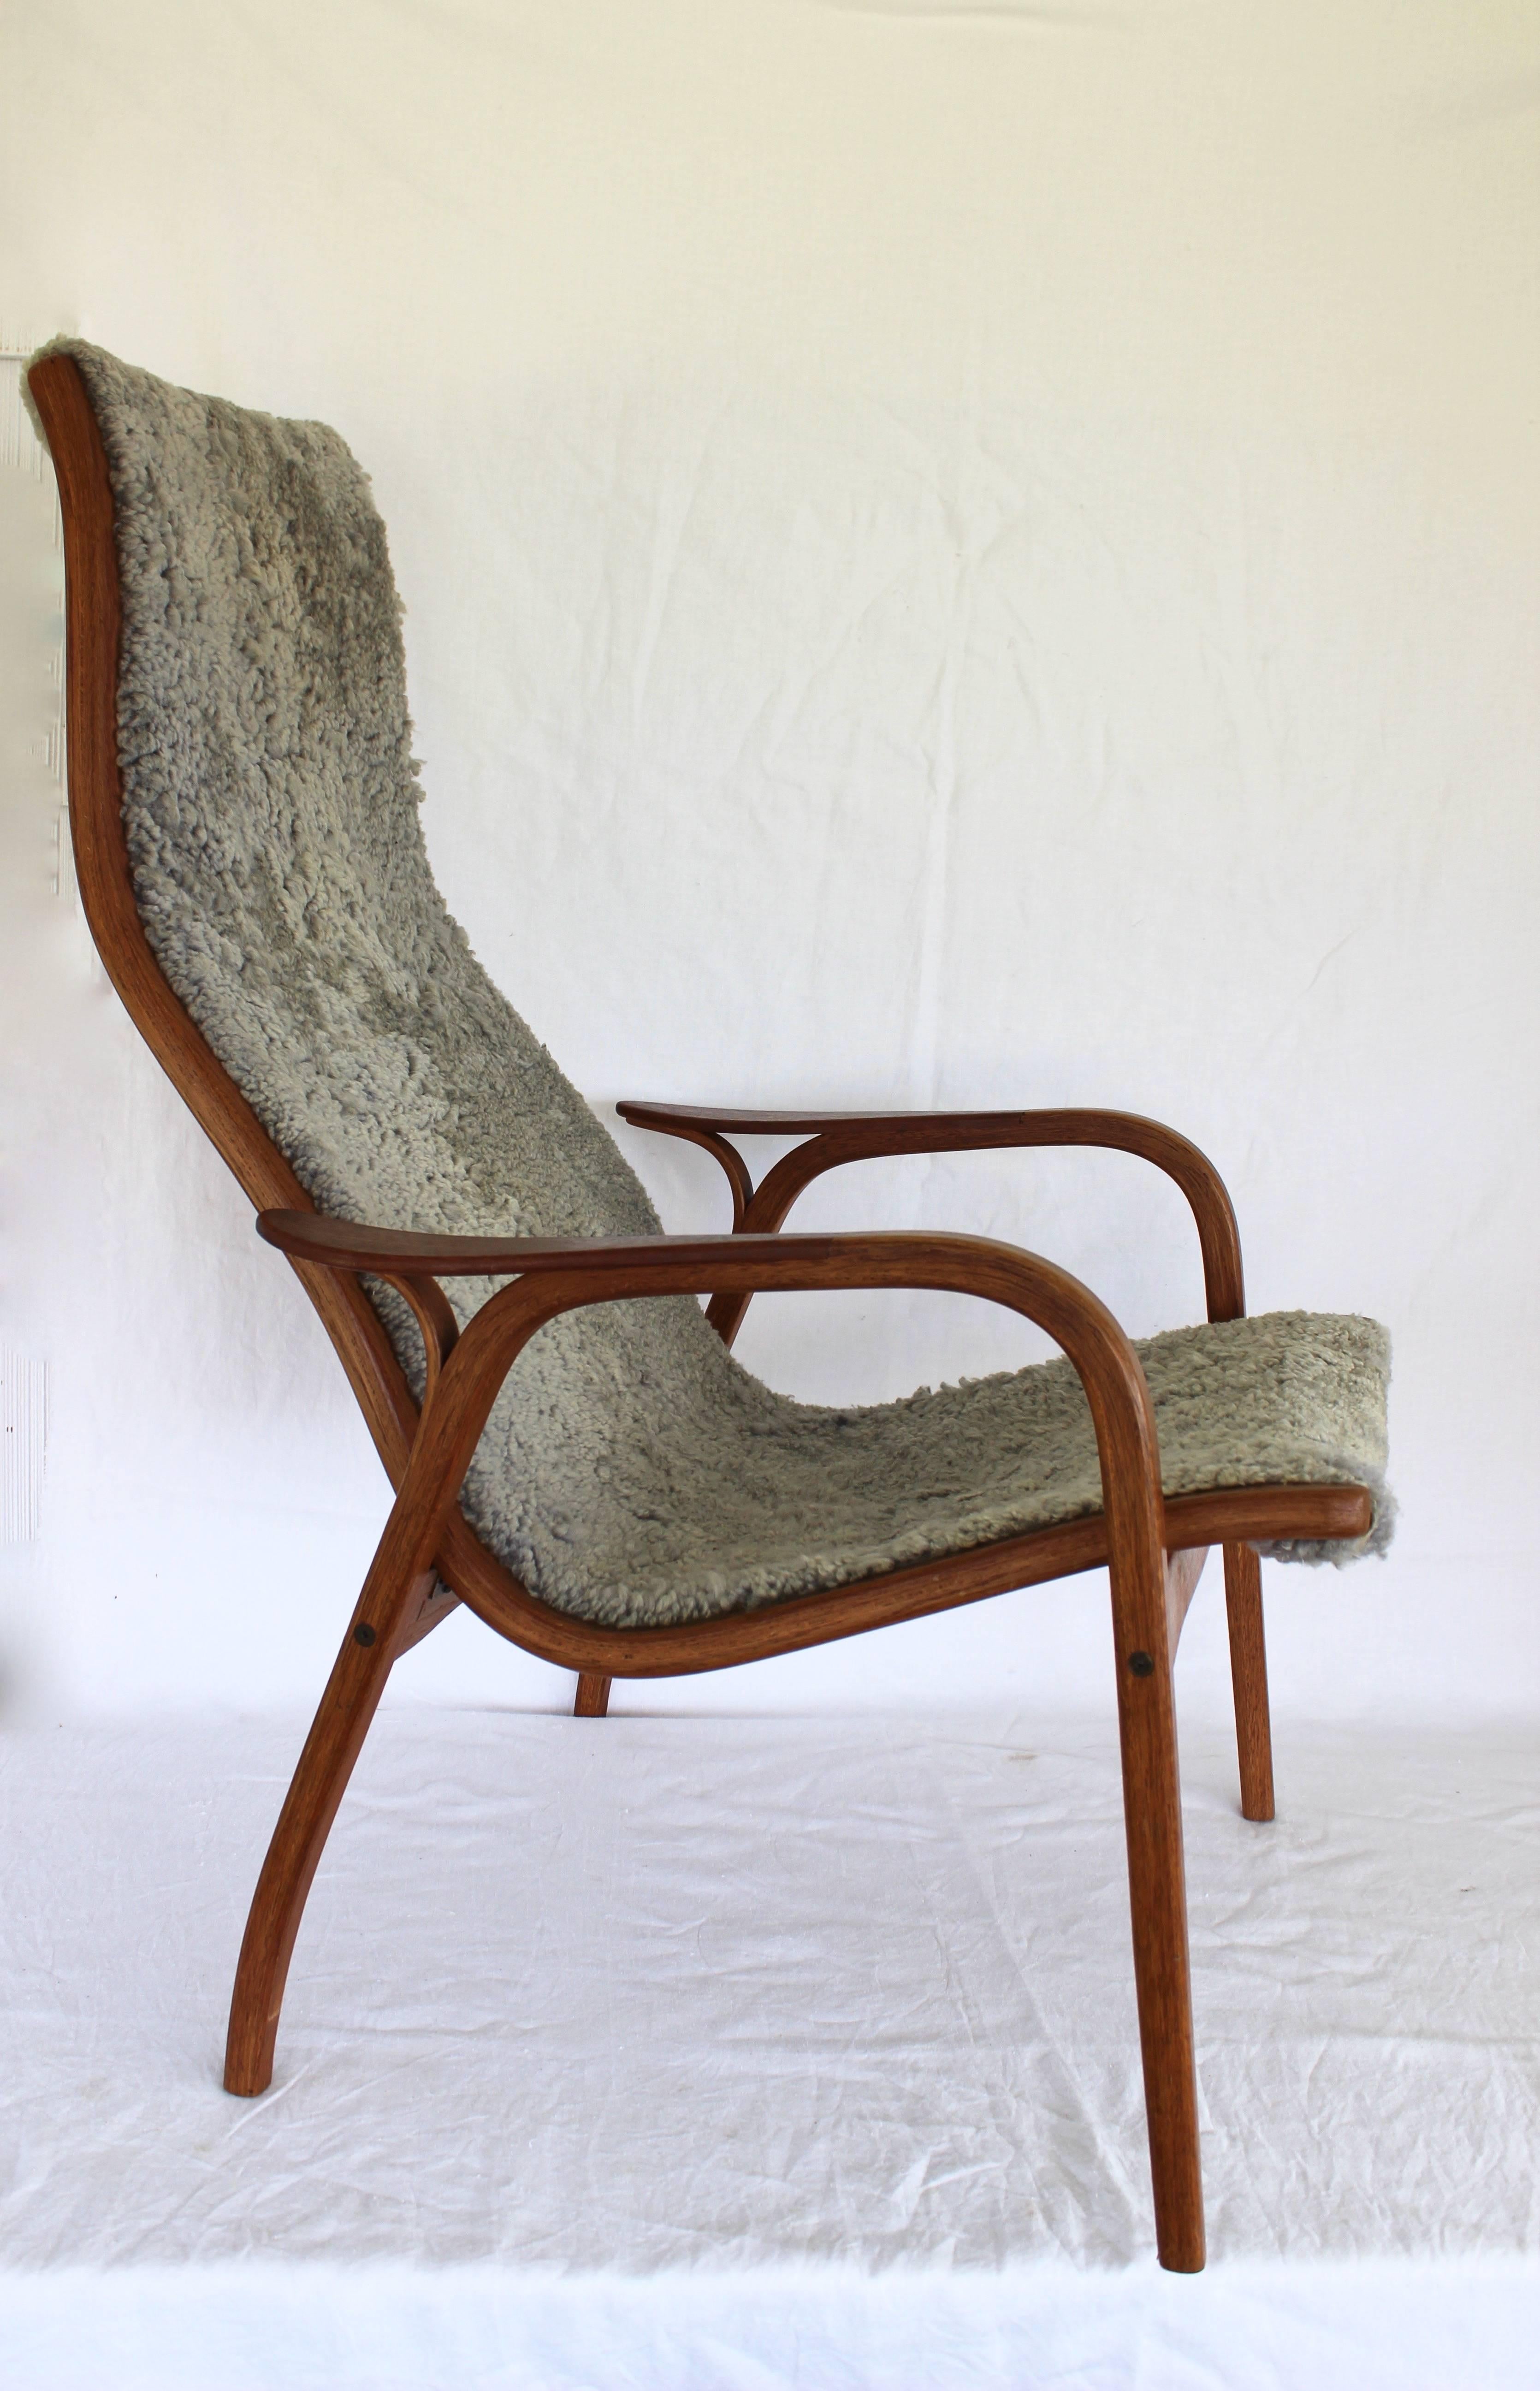 Lamino chair designed by Yngve Ekström for Swedese. Original upholstery, in fair condition.

Measures: Chair 27.25